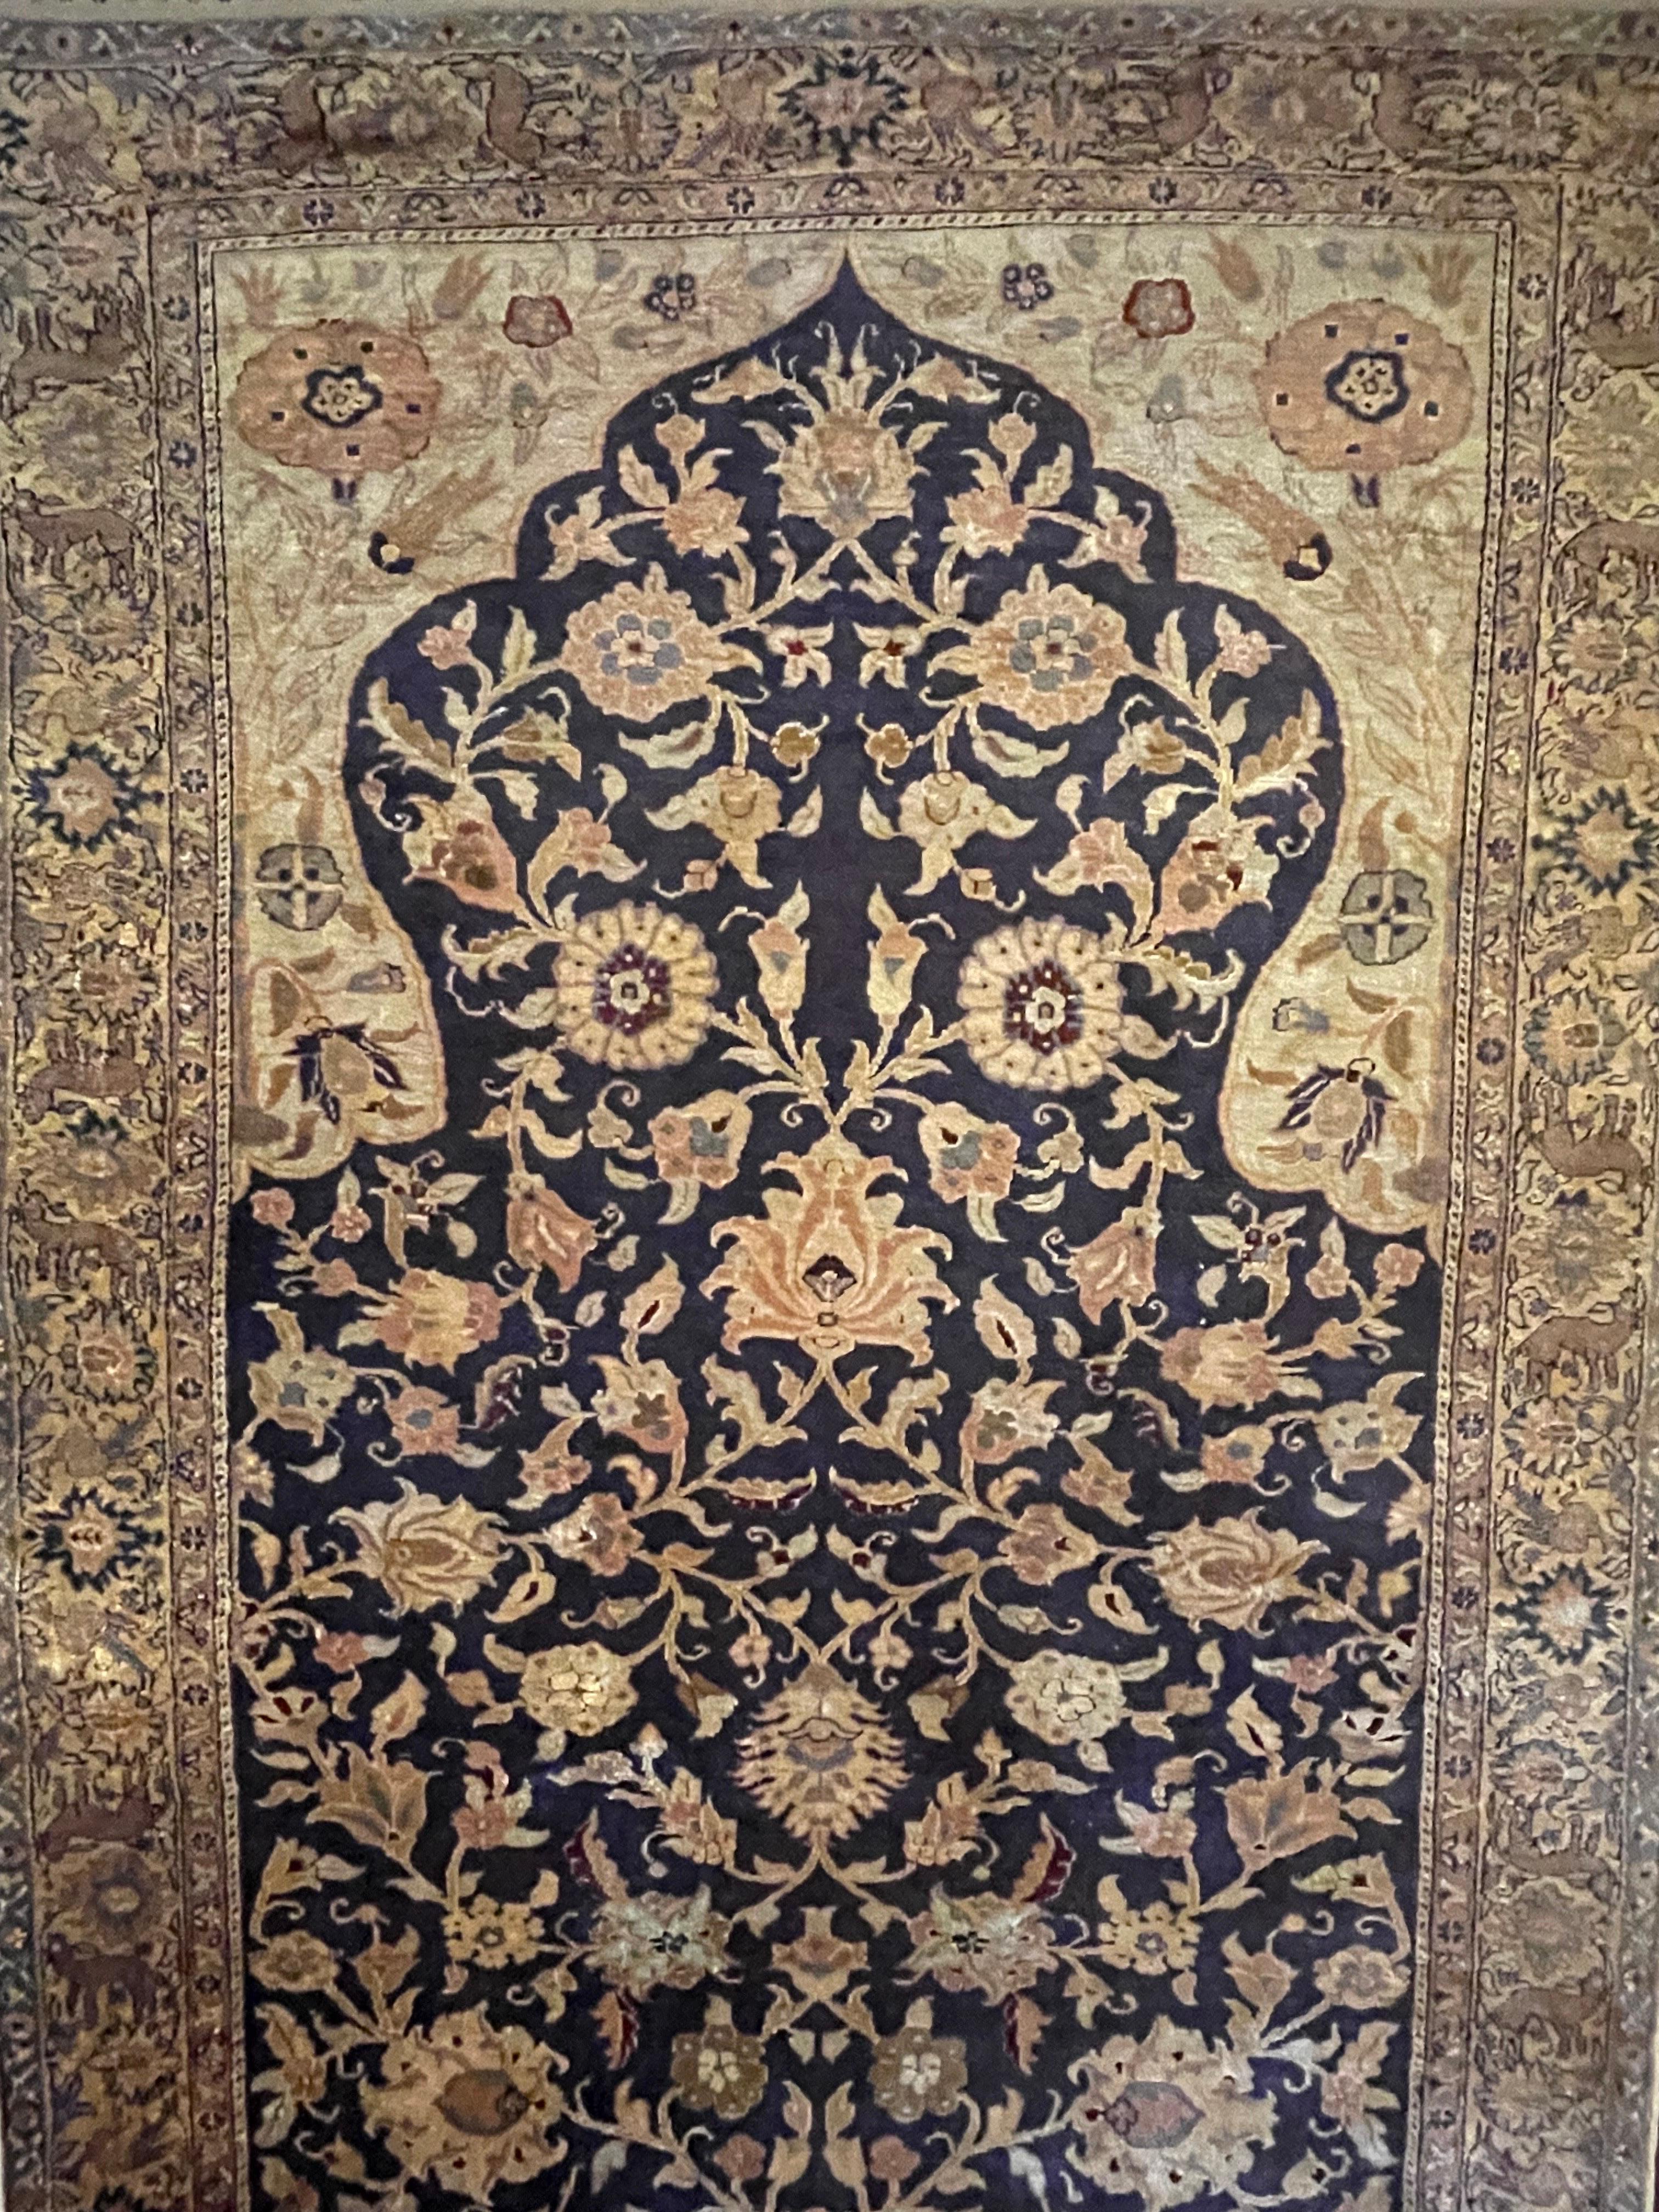 A very rare Kumkapi silk rug. This is truly a collector’s piece as not many original Kumkapi Silk Rugs are available in the market. Kumkapi was a village with Armenian population where pure silk rugs with extraordinary quality were woven in the 19th